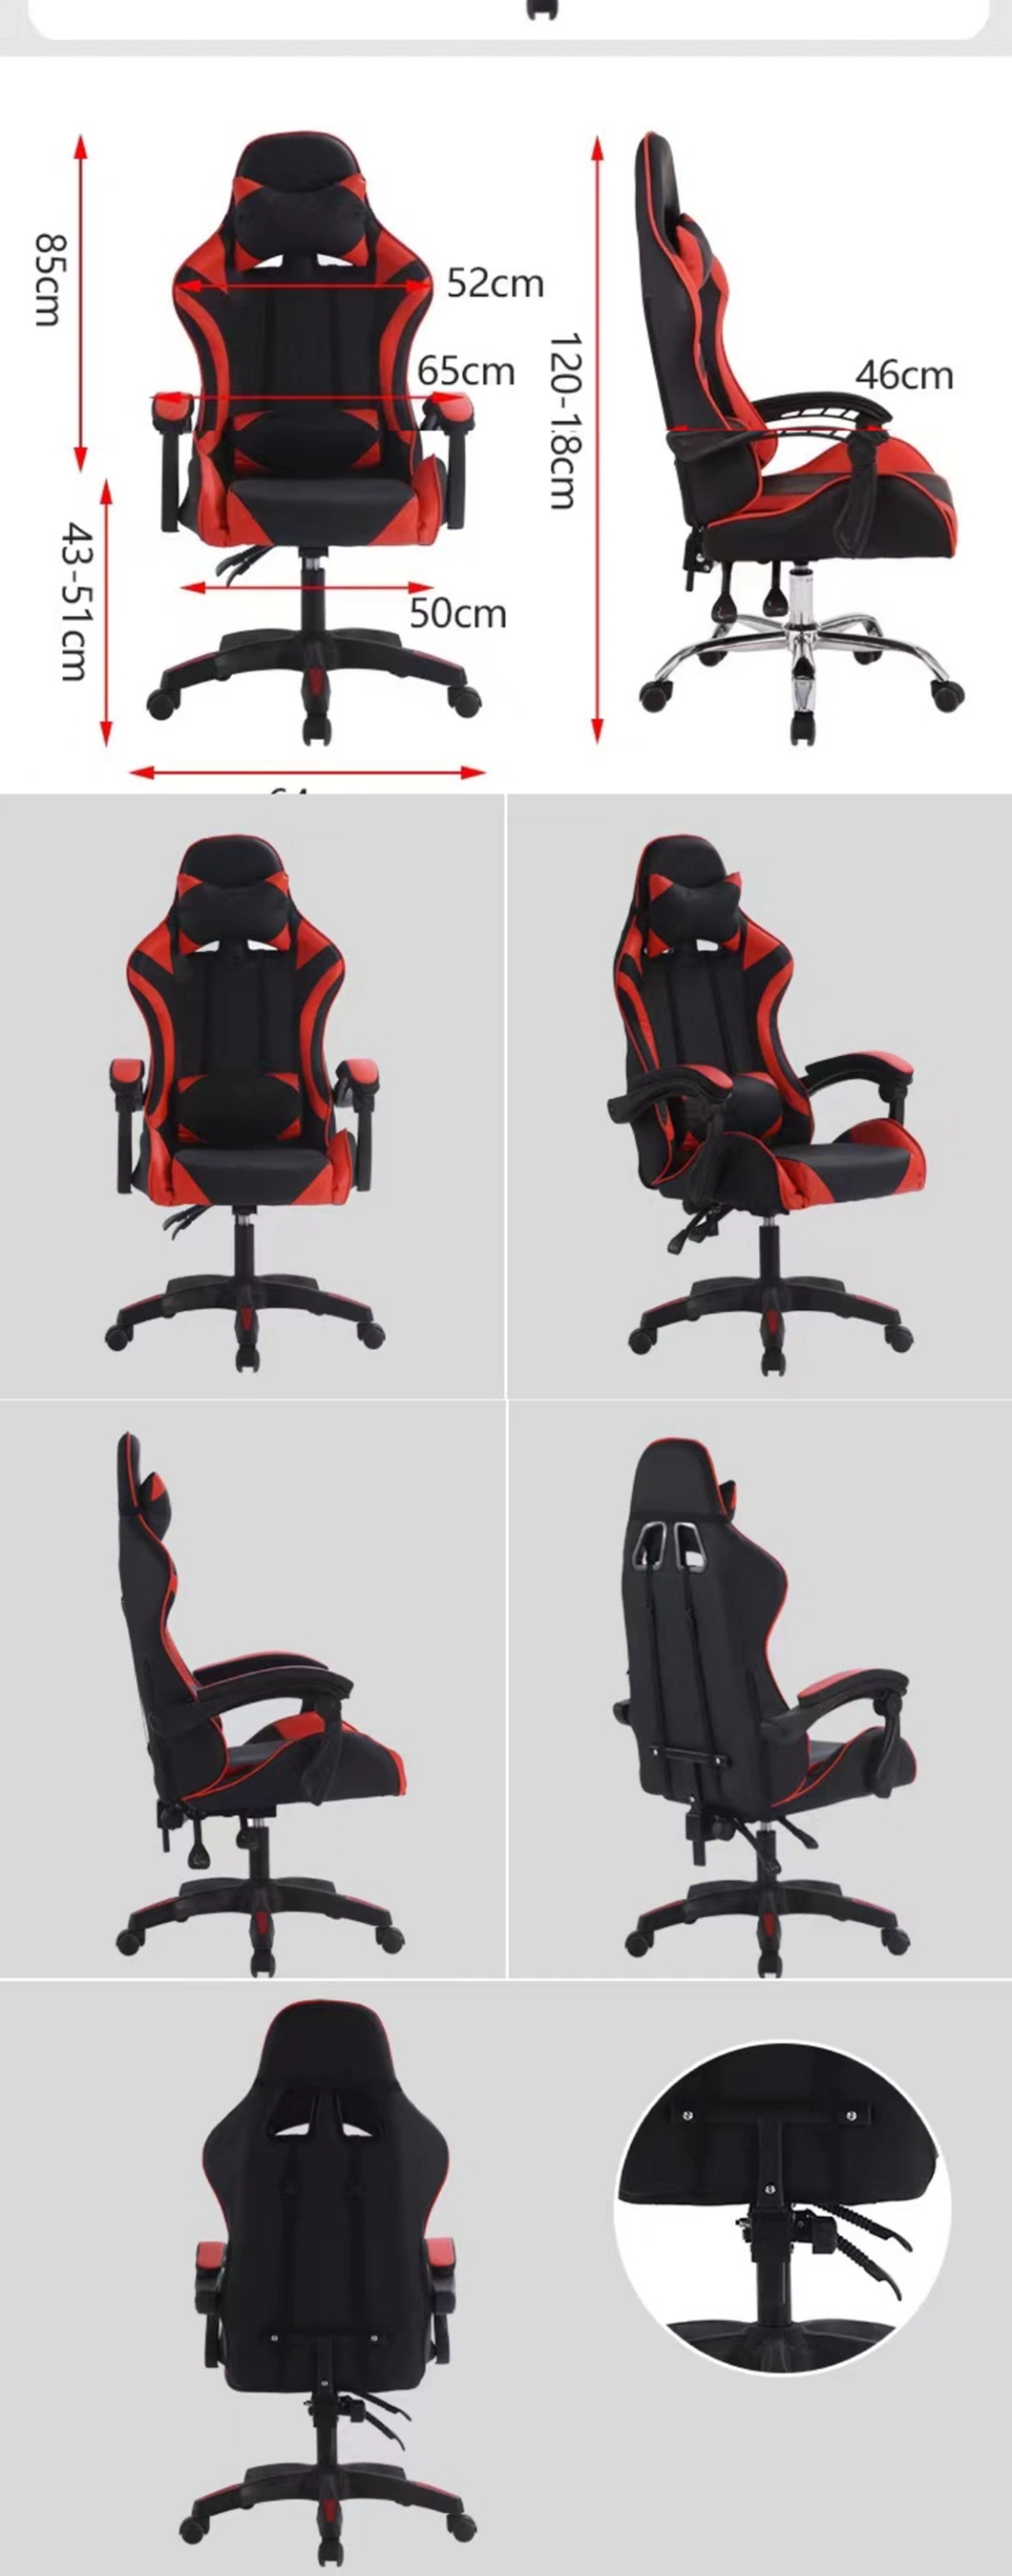 Manufacture Low Price High Quality Best Sale Swivel Gaming Chair